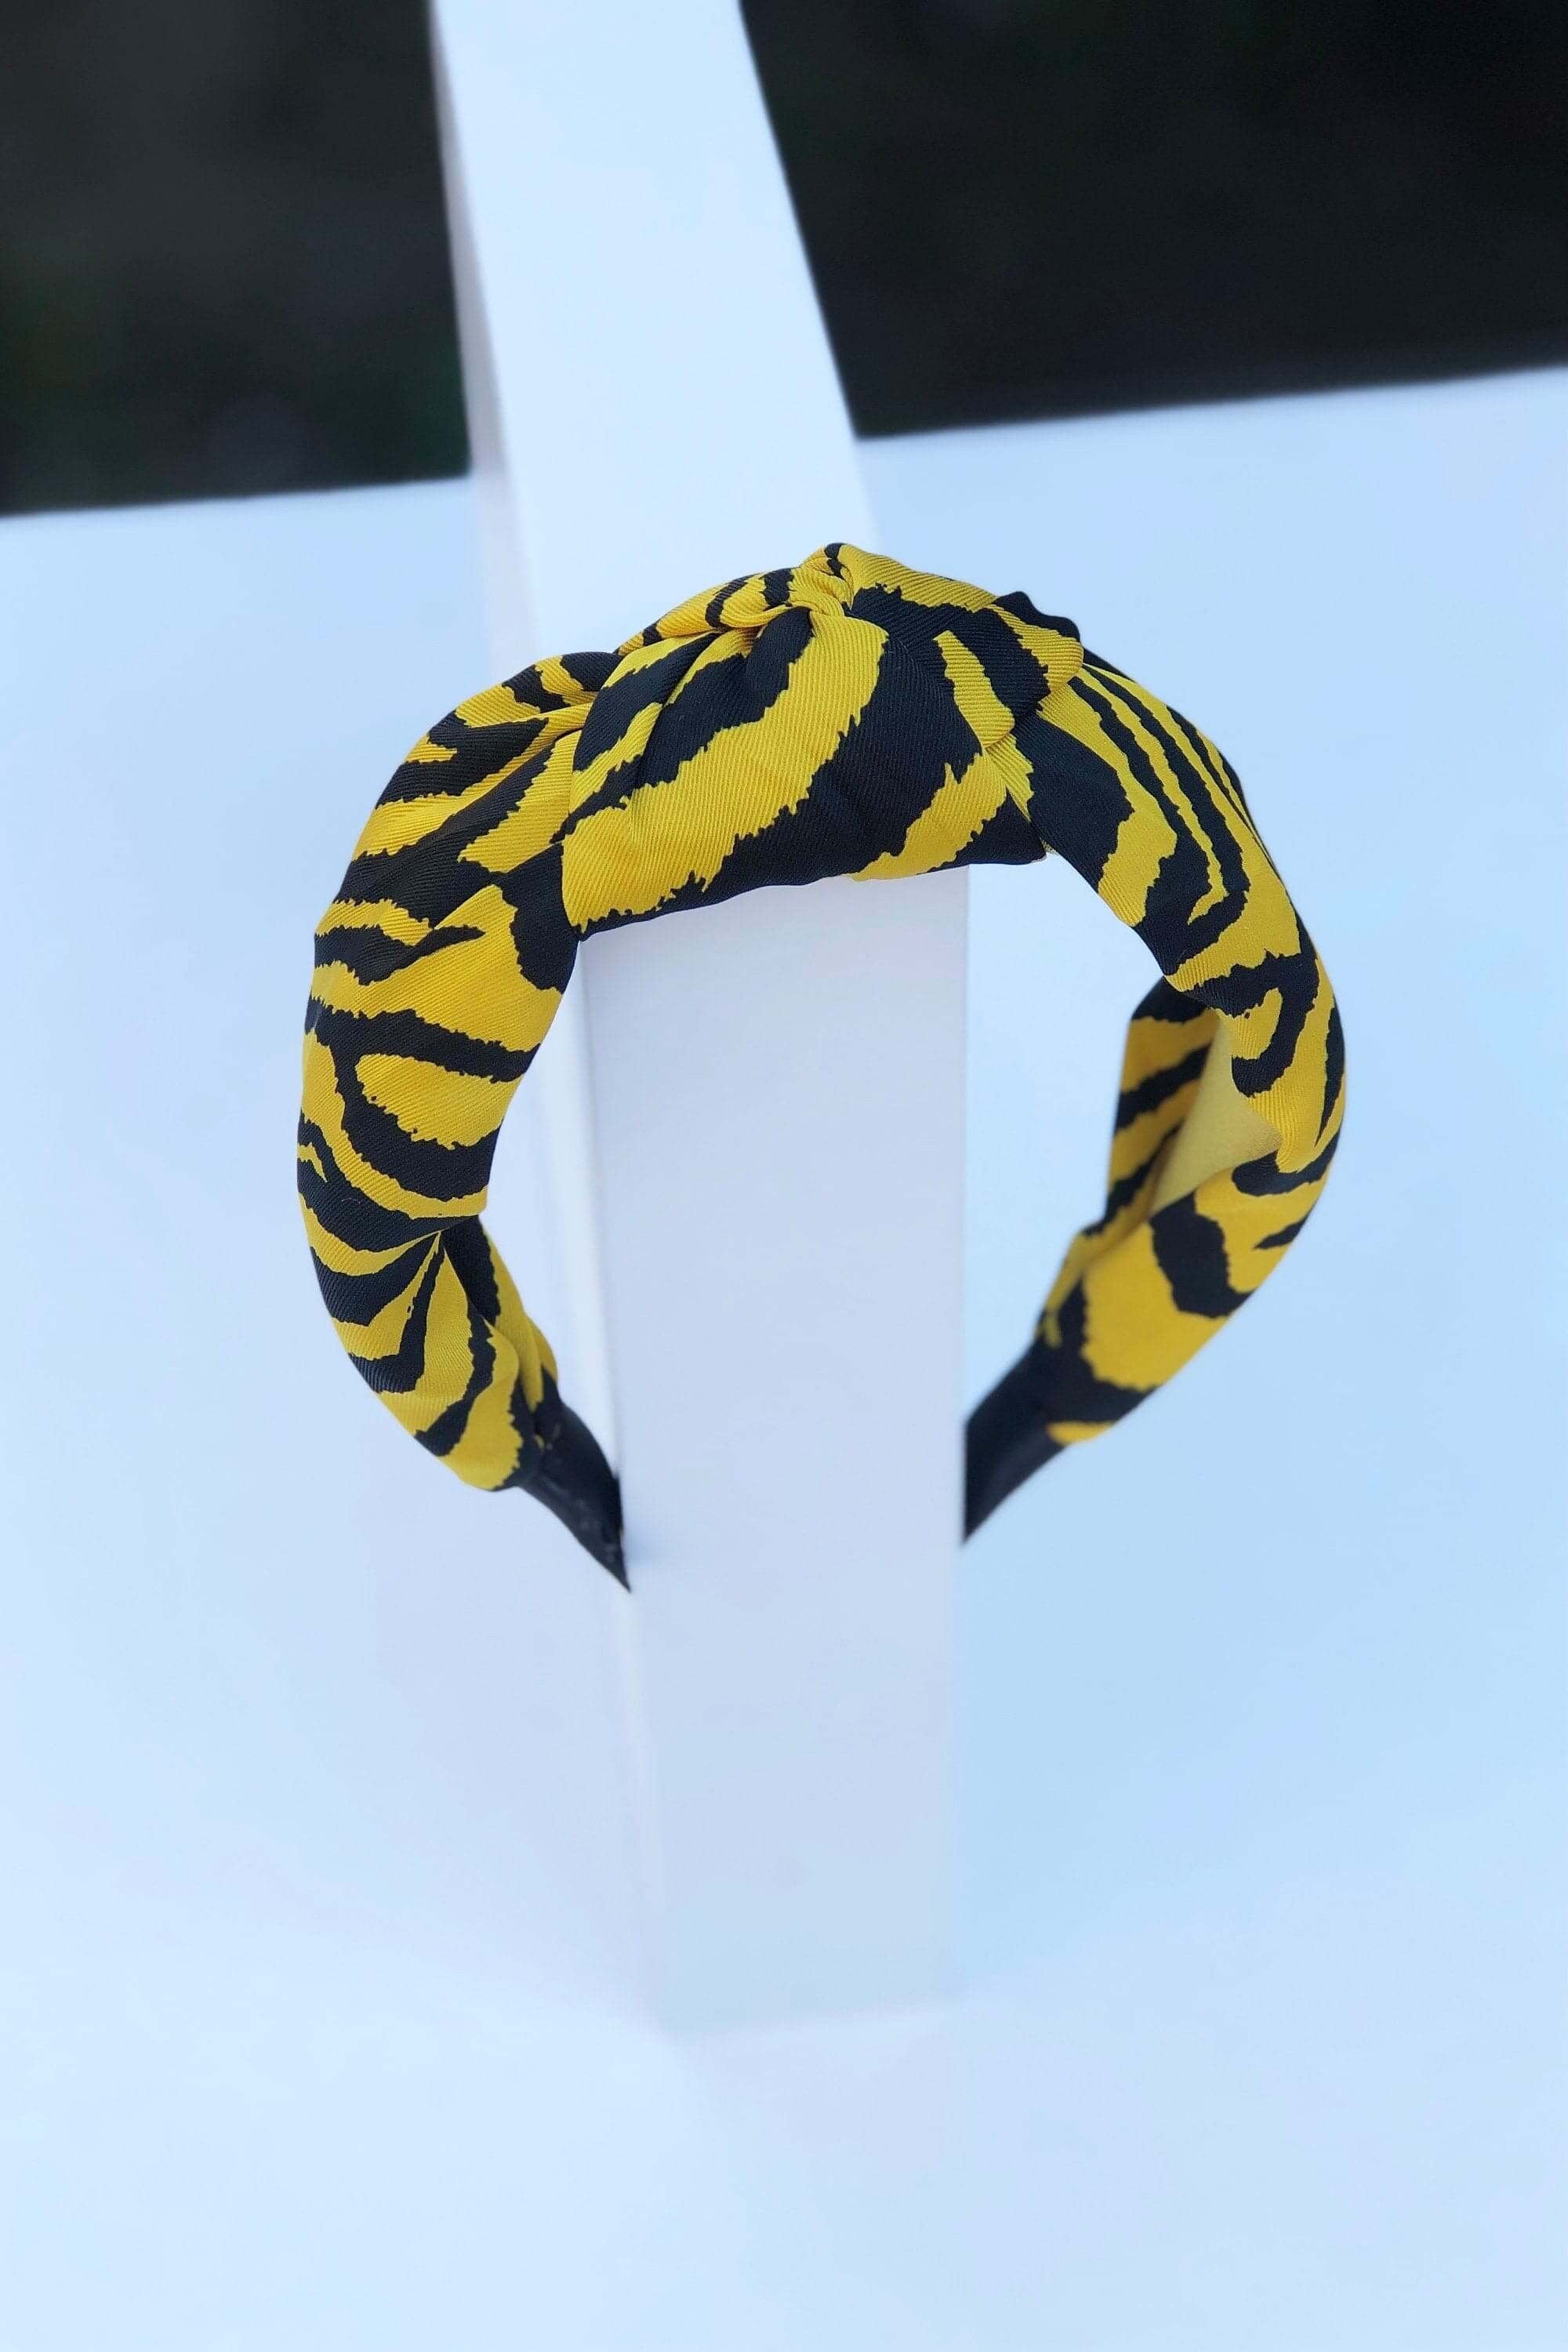 Stay stylish and on-trend with this must-have women&#39;s headband, designed in a fun zebra pattern and finished with a padded band for comfort.